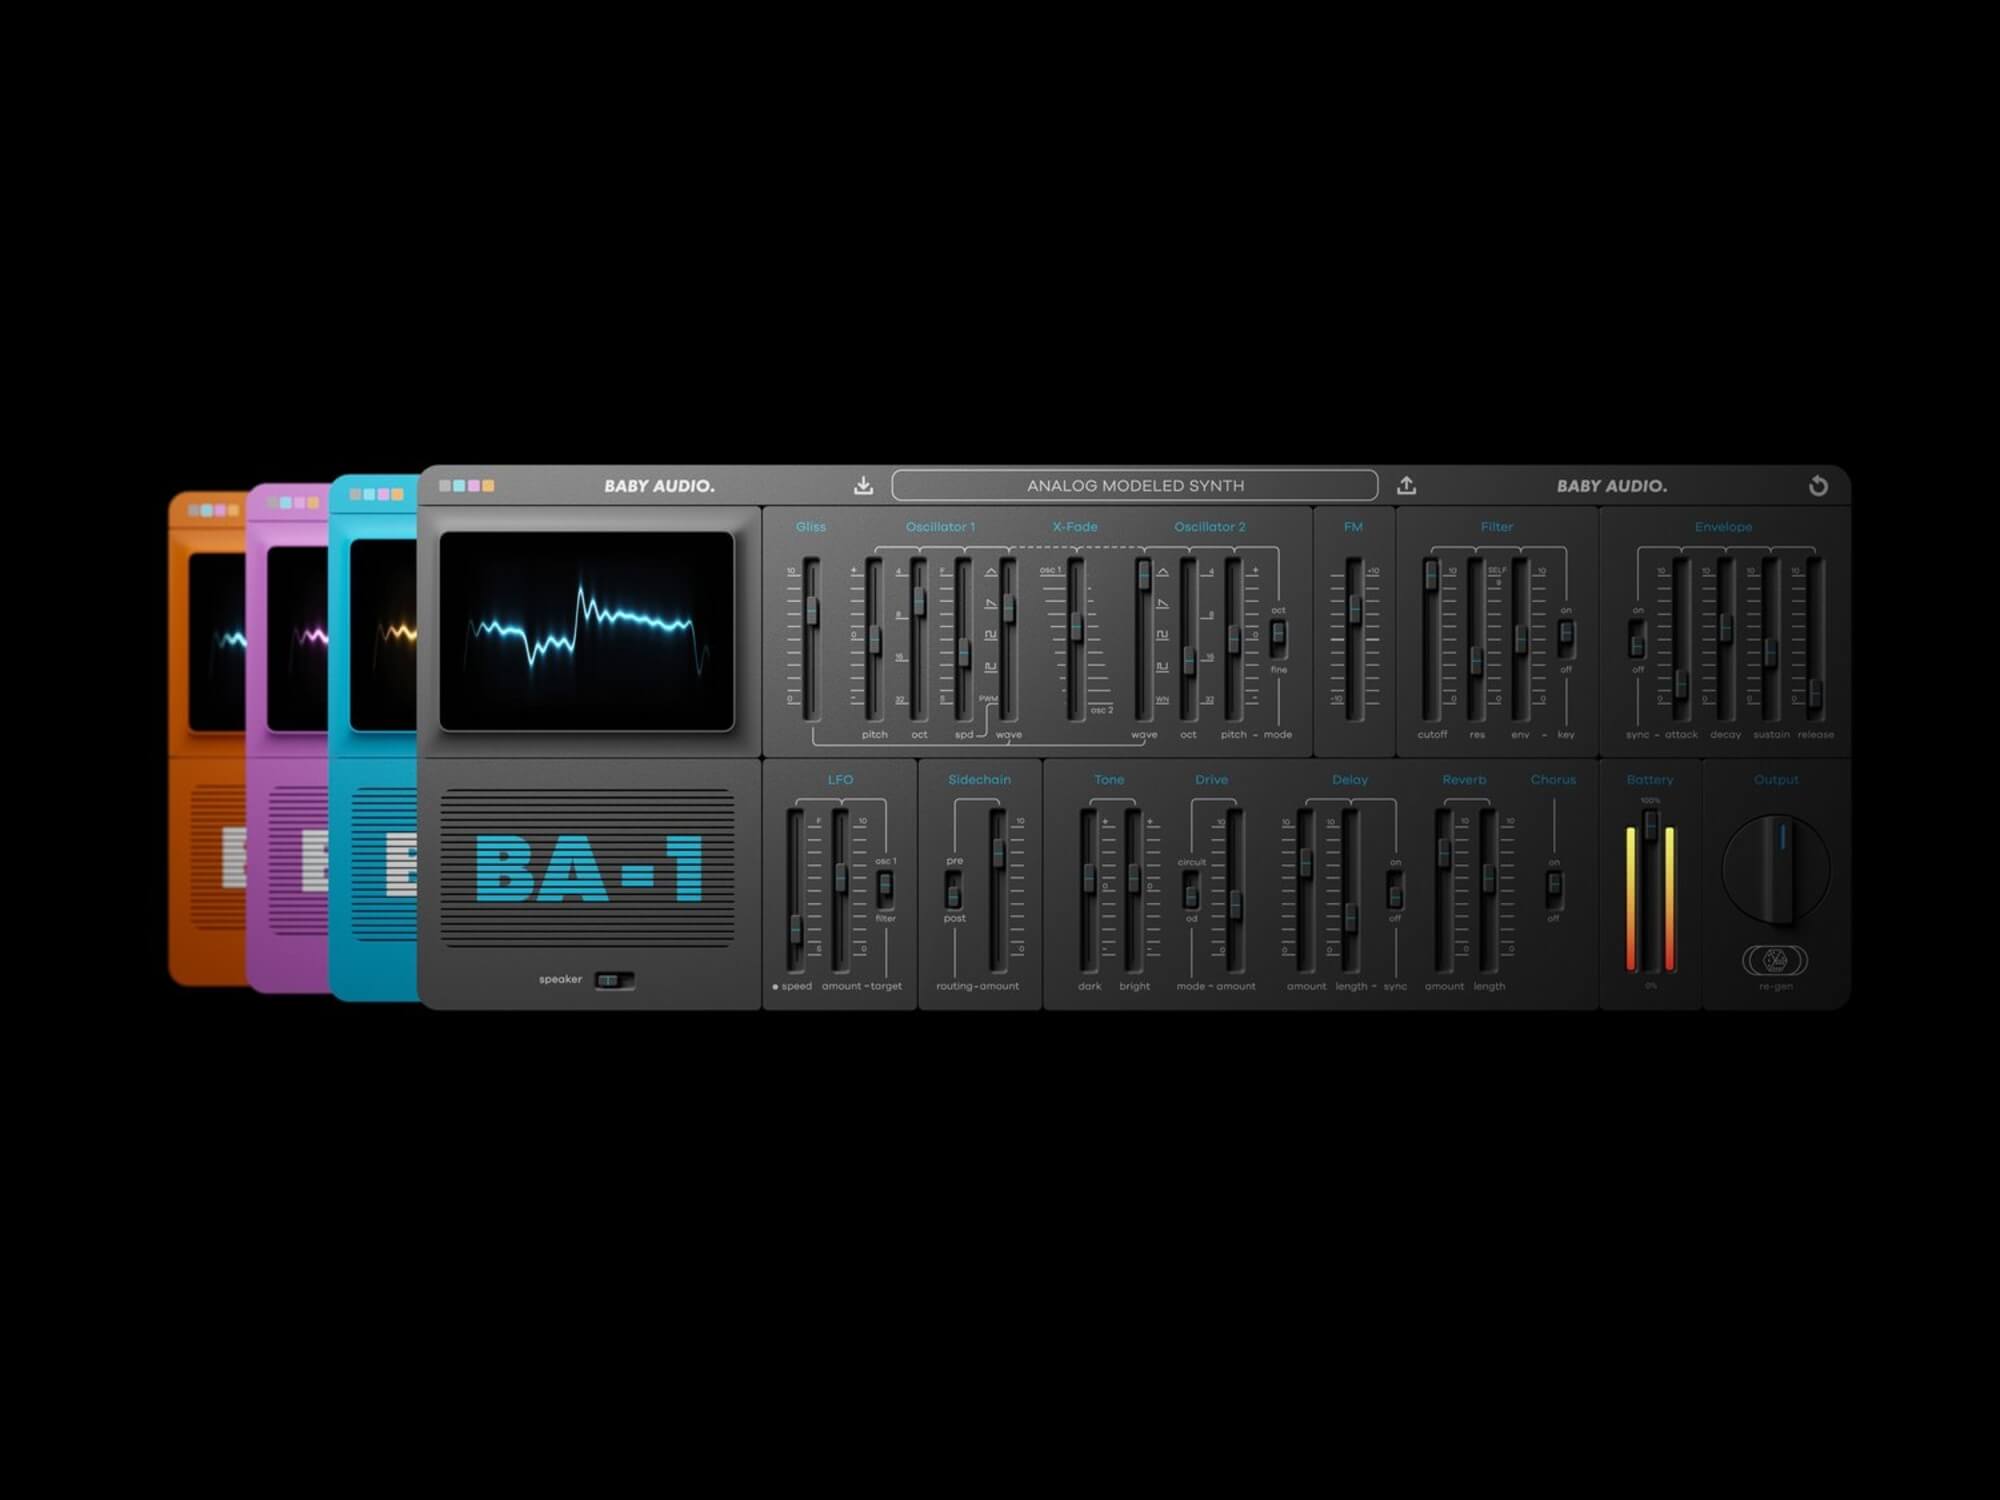 Baby Audio's first soft synth, BA-1, is modelled after Yamaha CS01